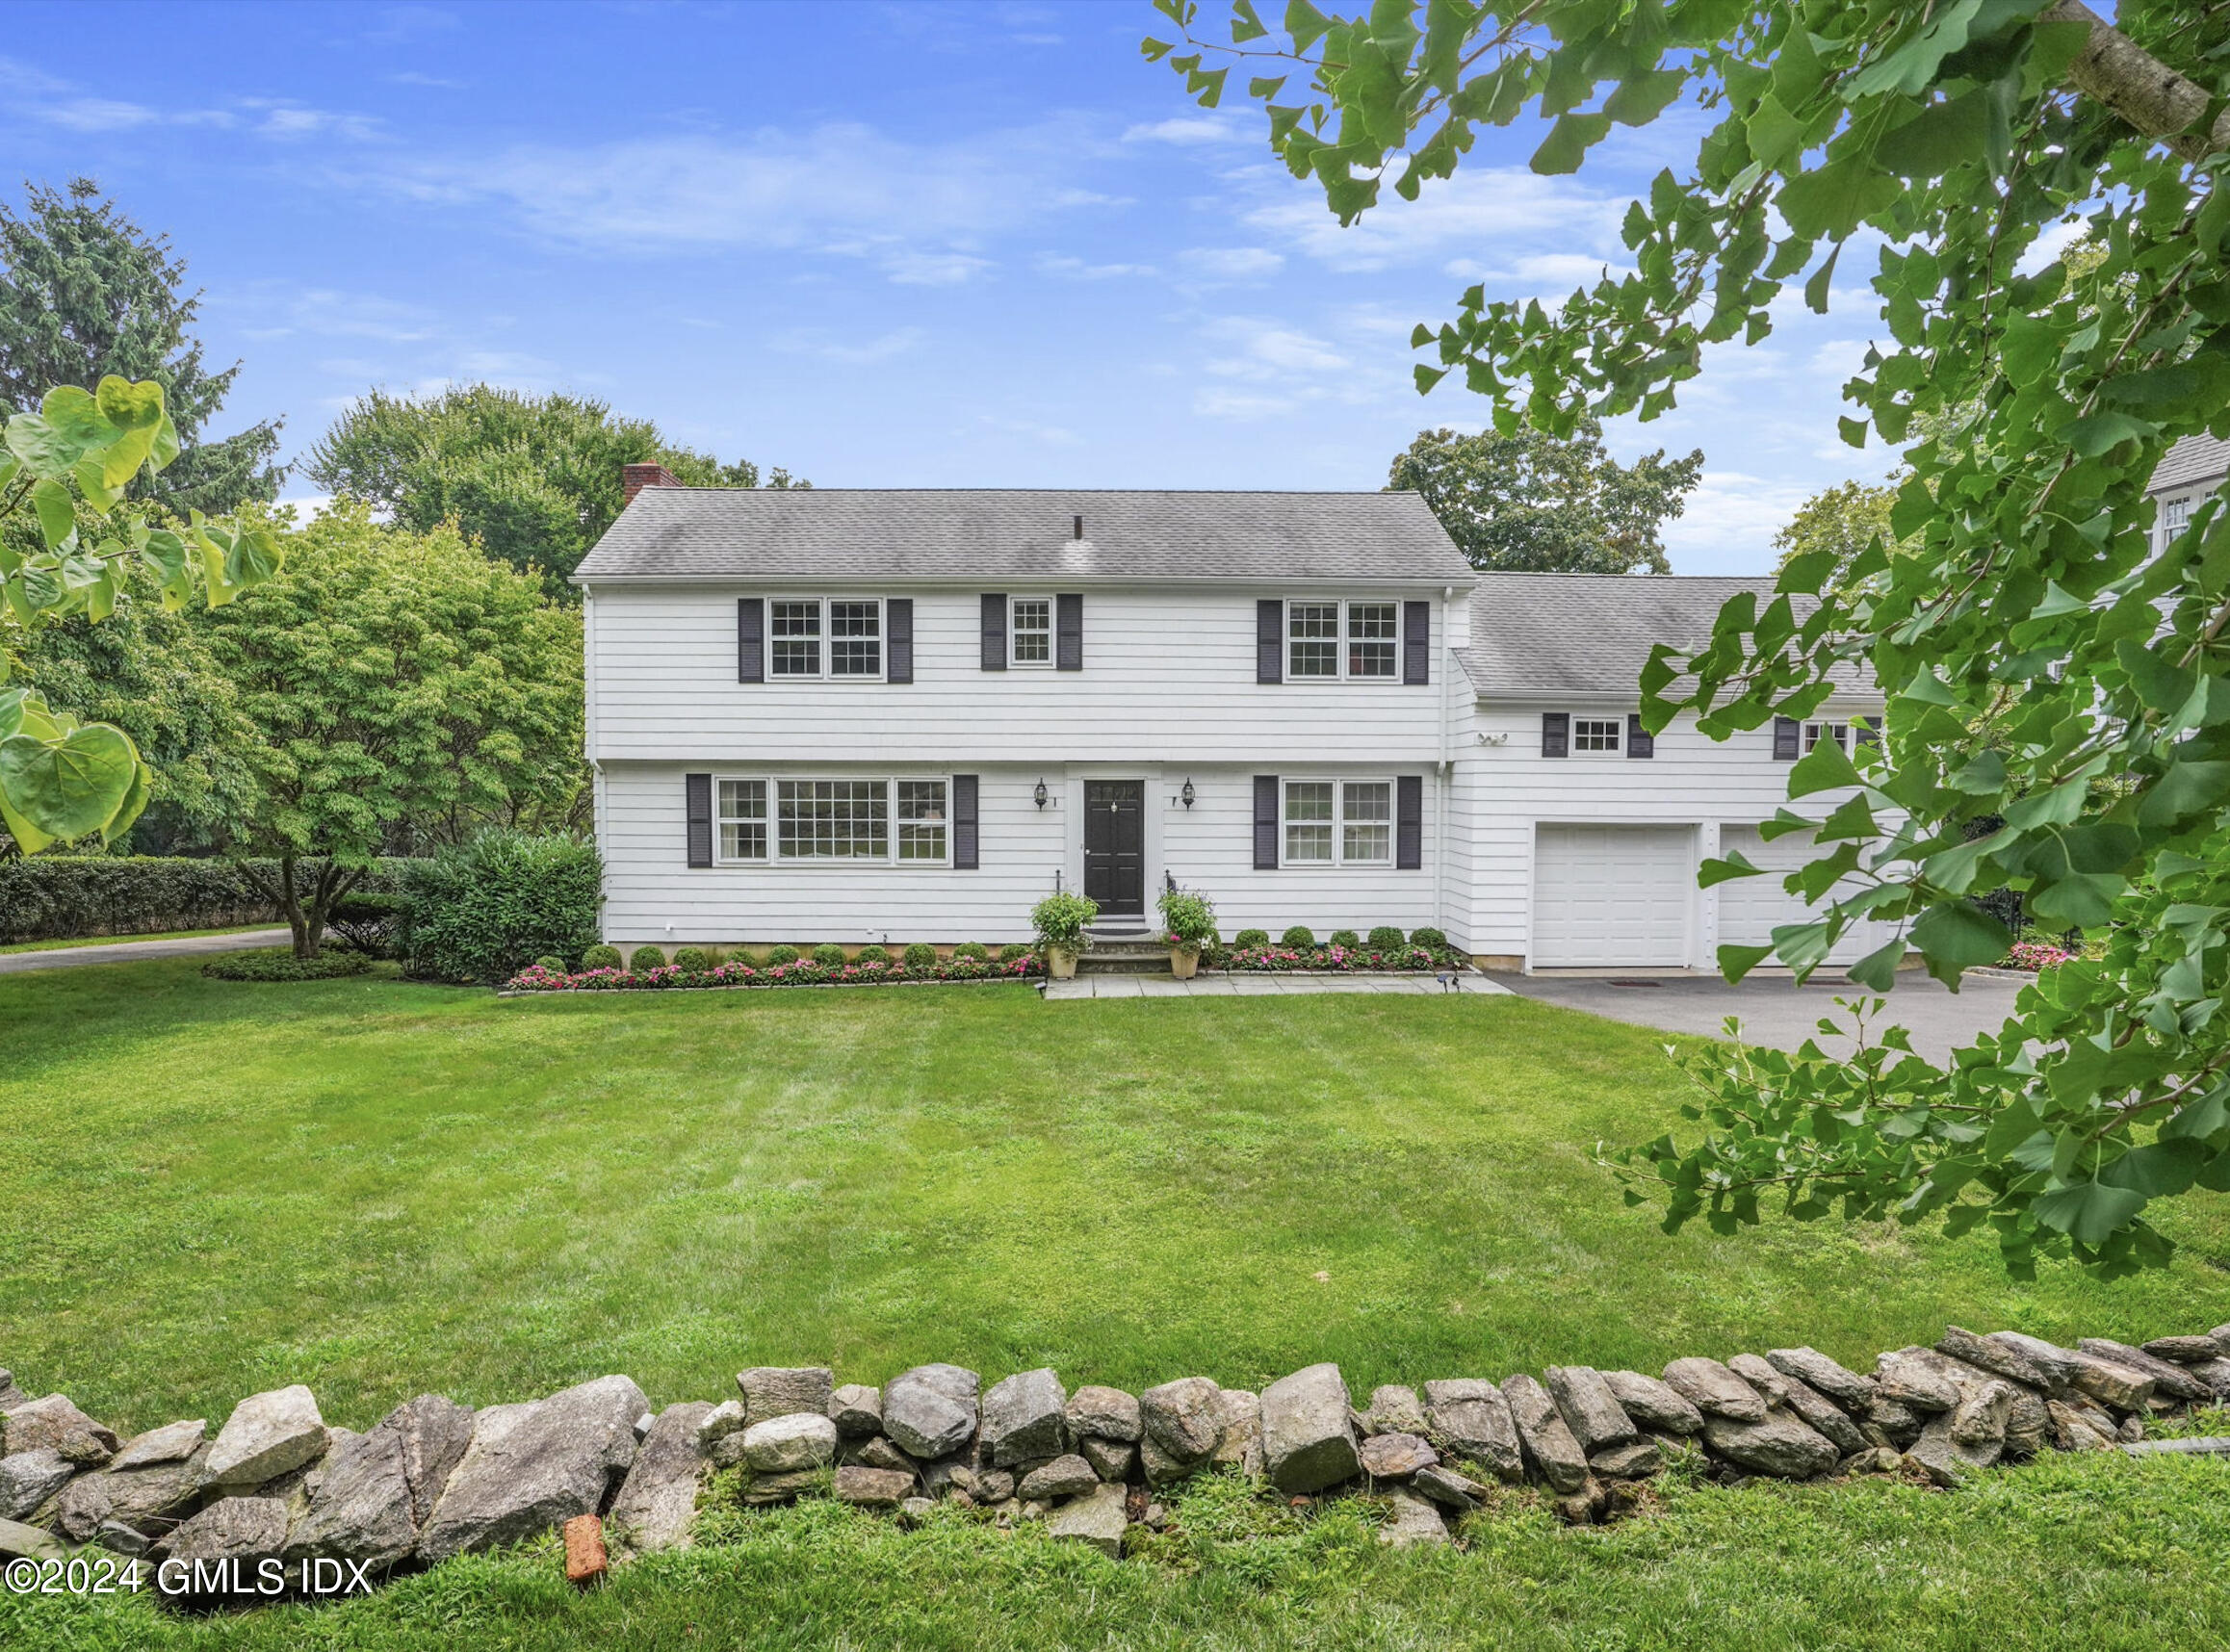 Rental Property at 51 Byram Shore Road, Greenwich, Connecticut - Bedrooms: 5 
Bathrooms: 4  - $13,500 MO.